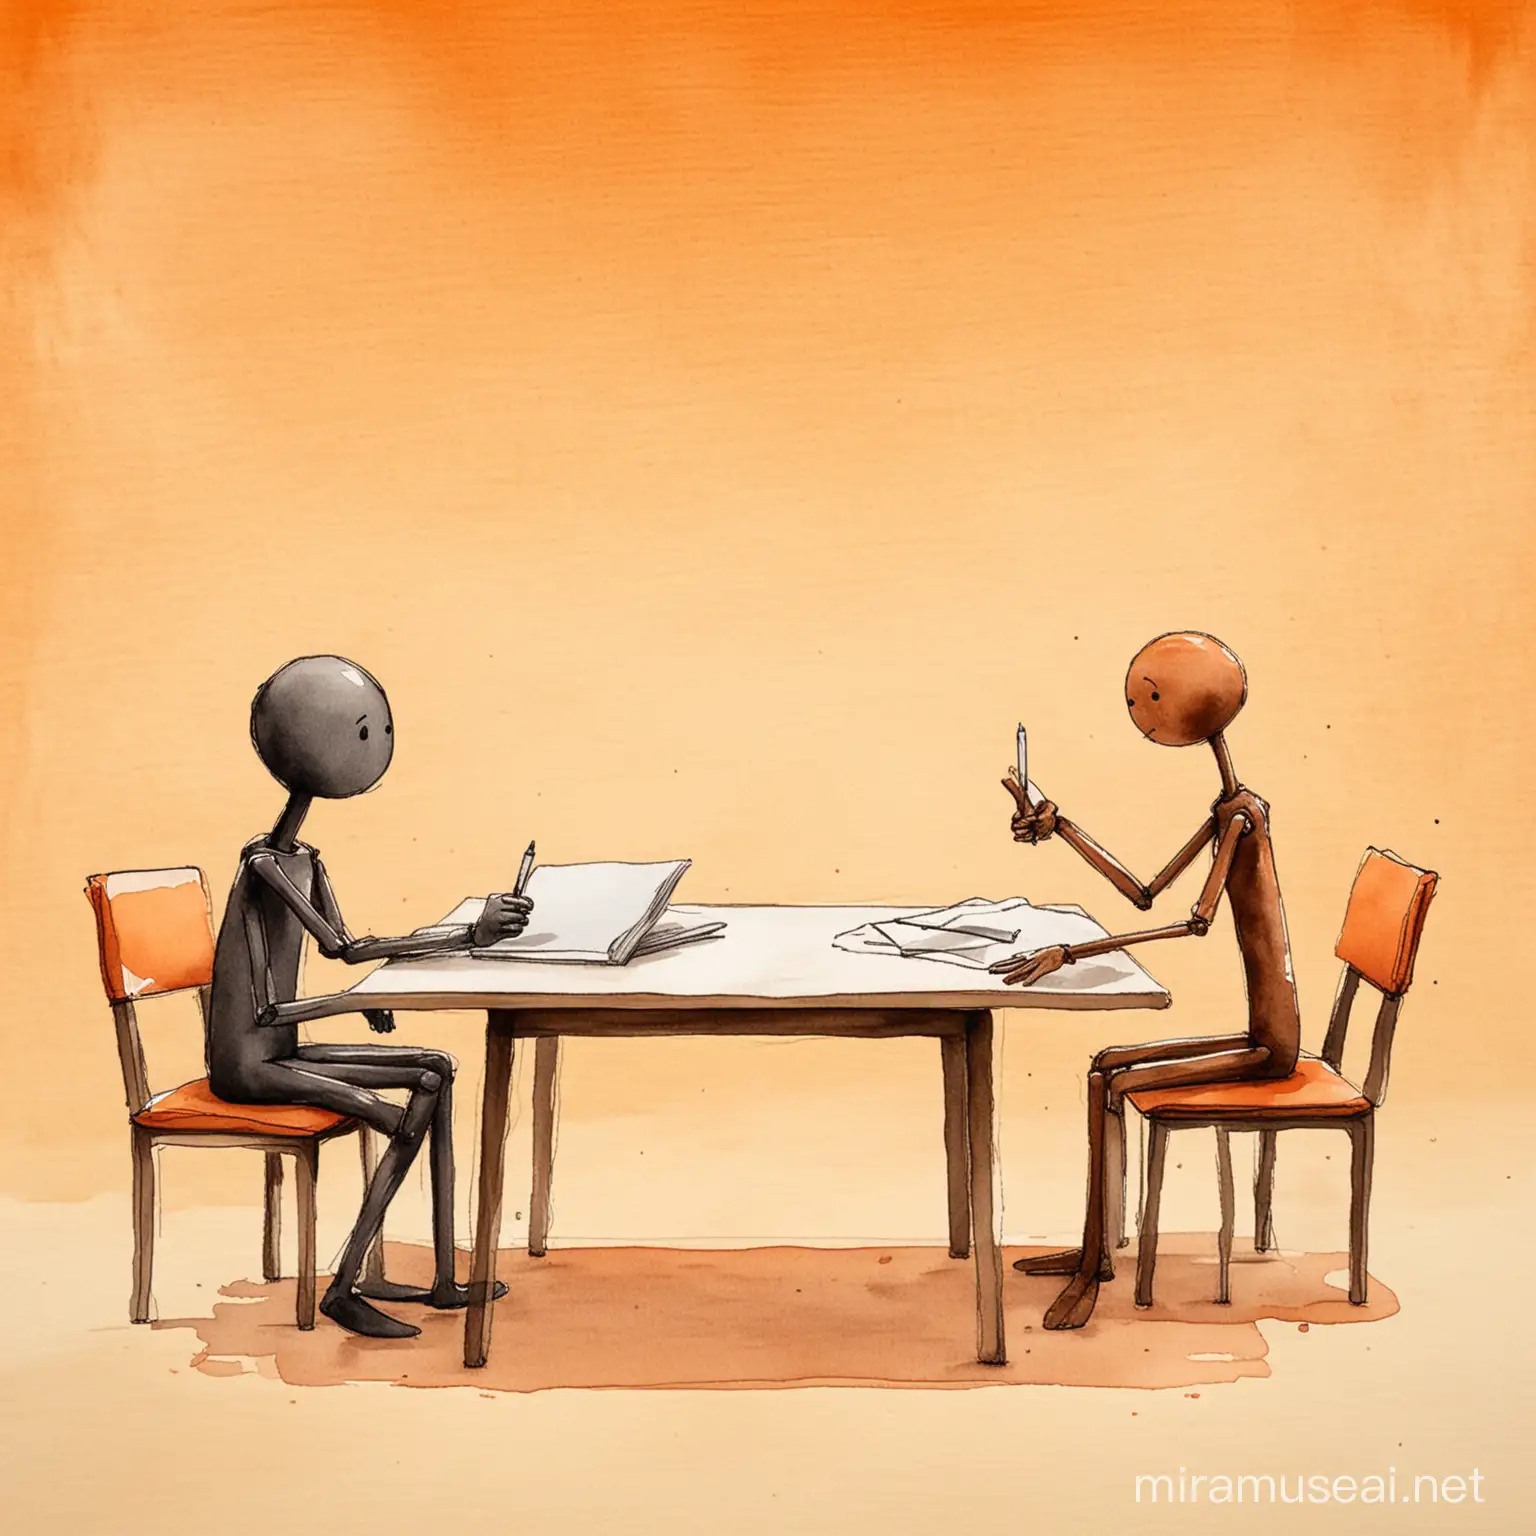 Technique: Visual Thinking Styles
Style: Hand-painted watercolor
Content: A big stickman and a small stickman sit face to face at a table. The table is filled with notebooks. The big stickman points his finger at the little stickman and curses, while the little stickman lowers his head.
Background: gradient orange background